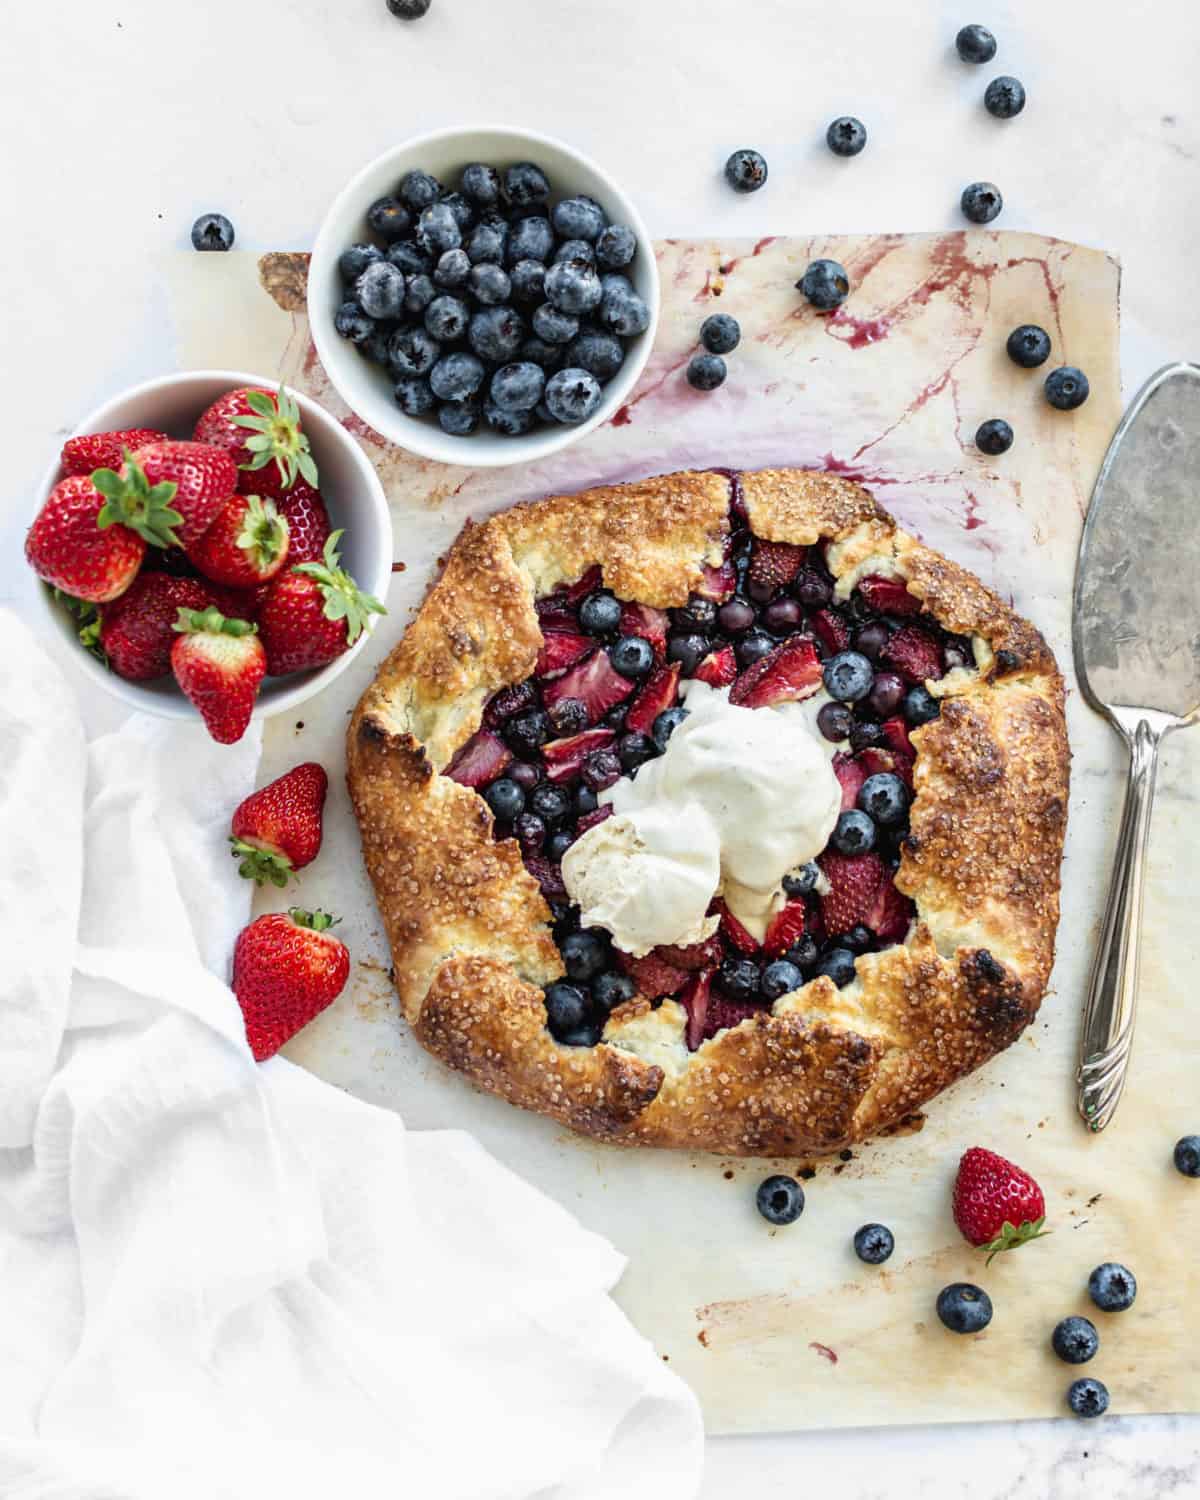 Blueberry and strawberry pie with fresh fruit.